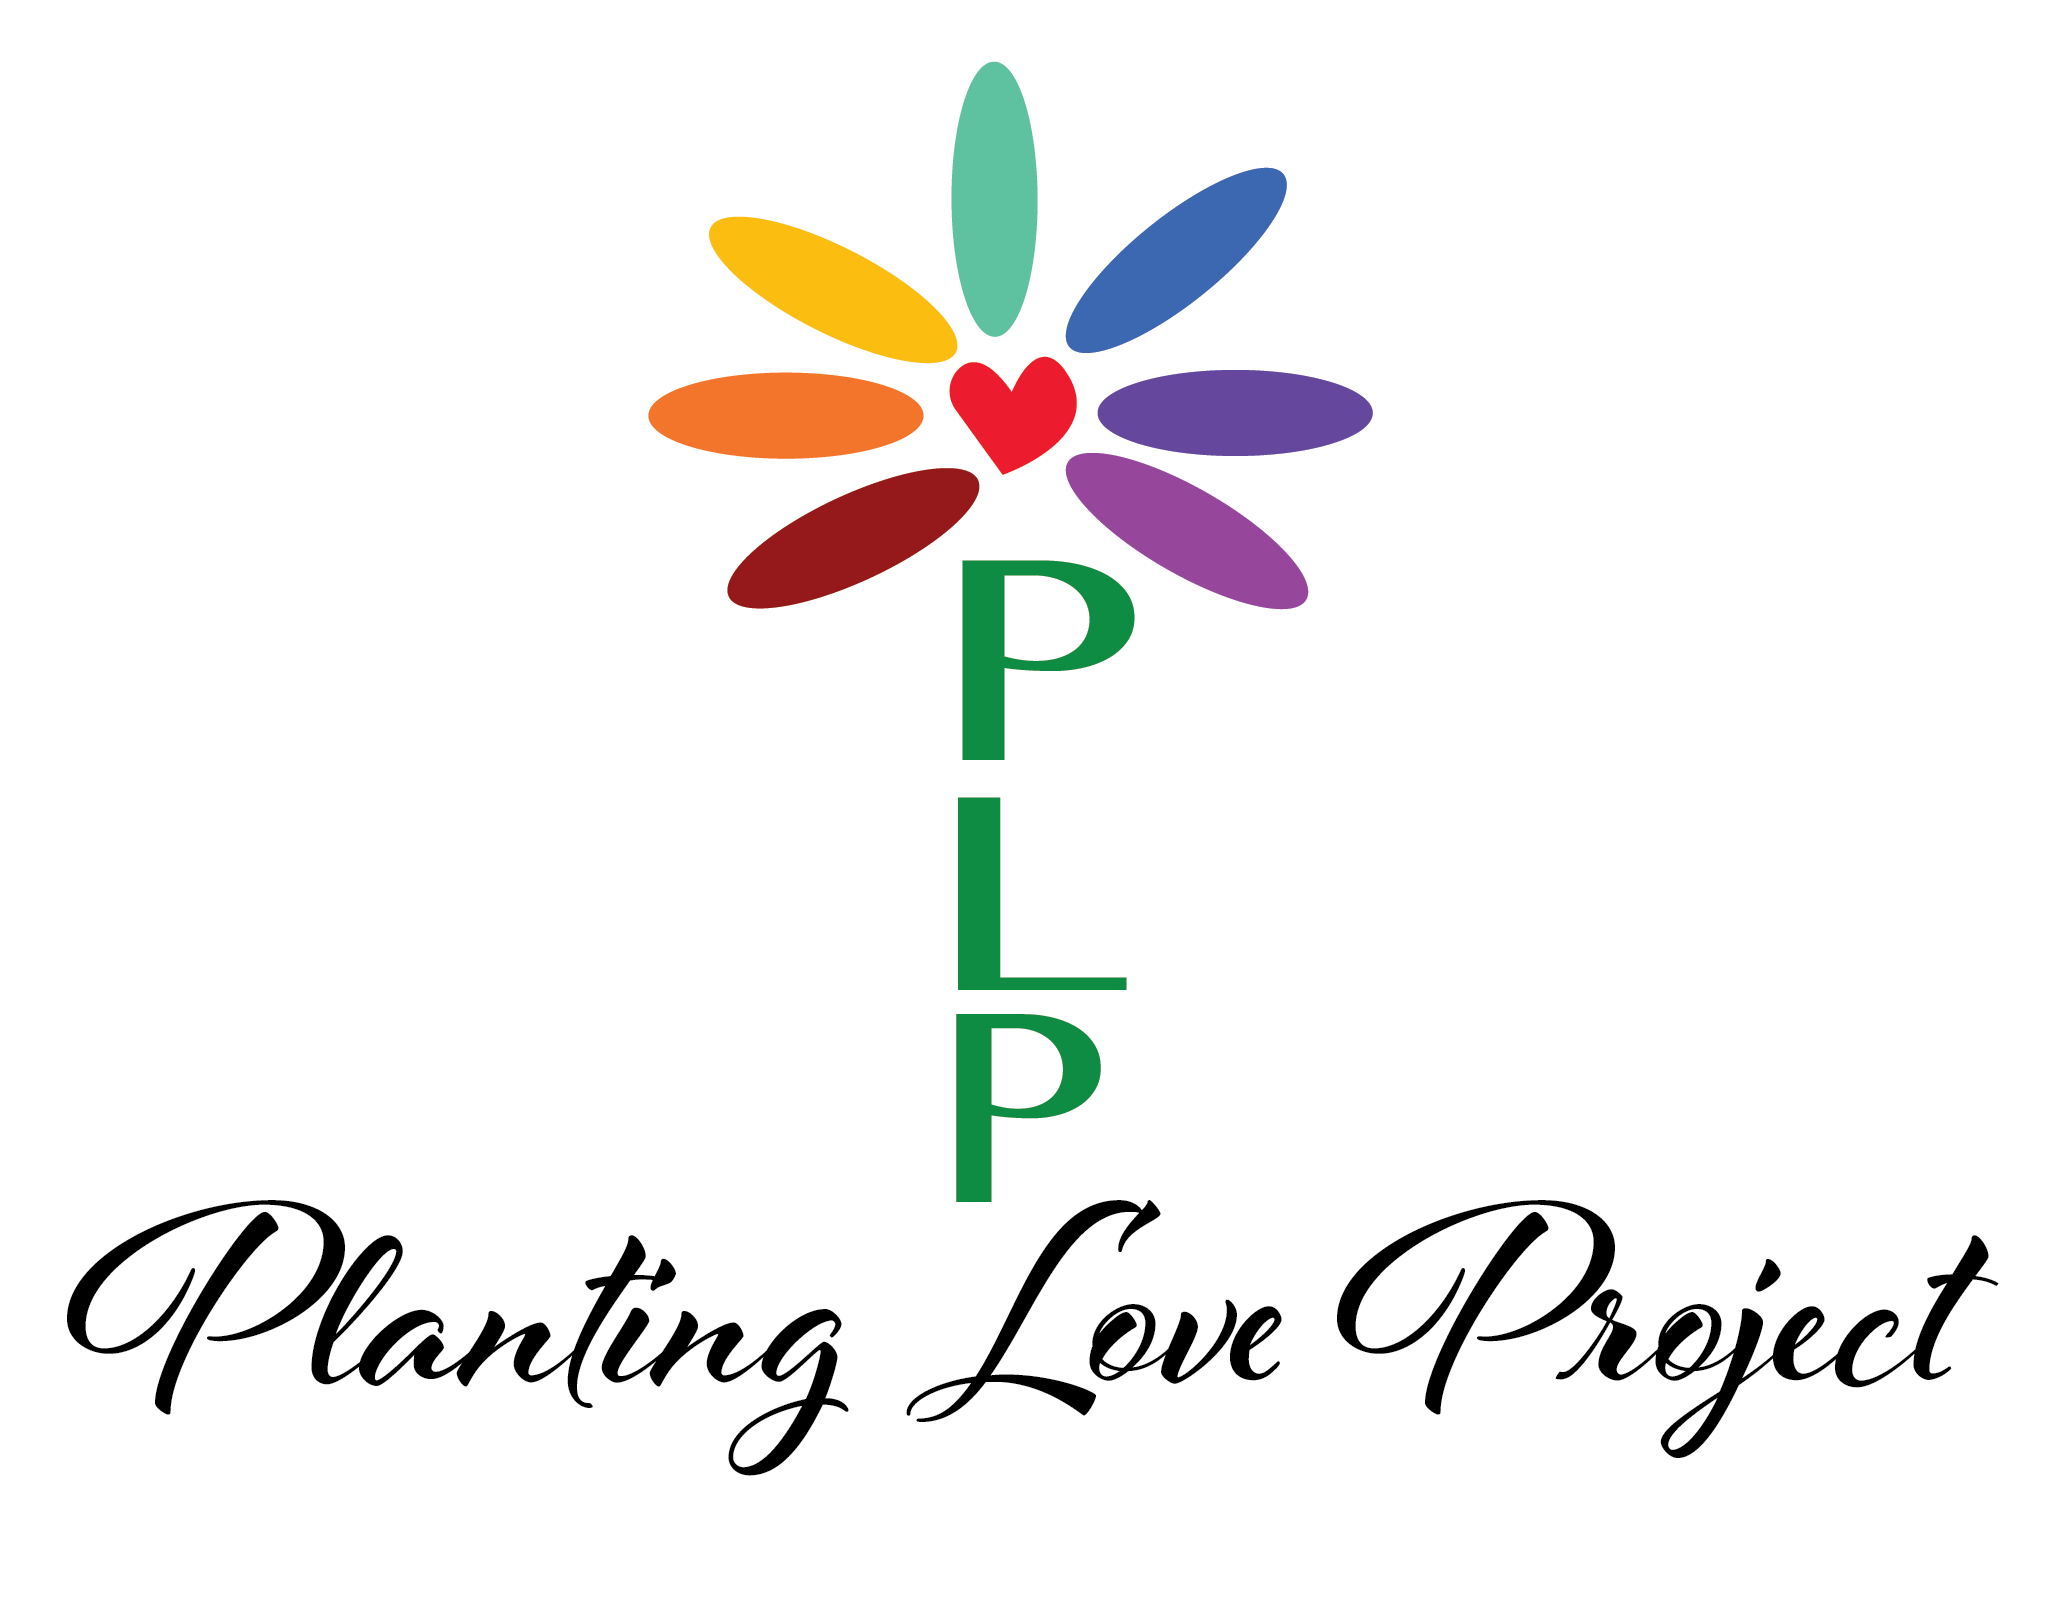 Planting Love Project logo for the MAD4P Festival Website